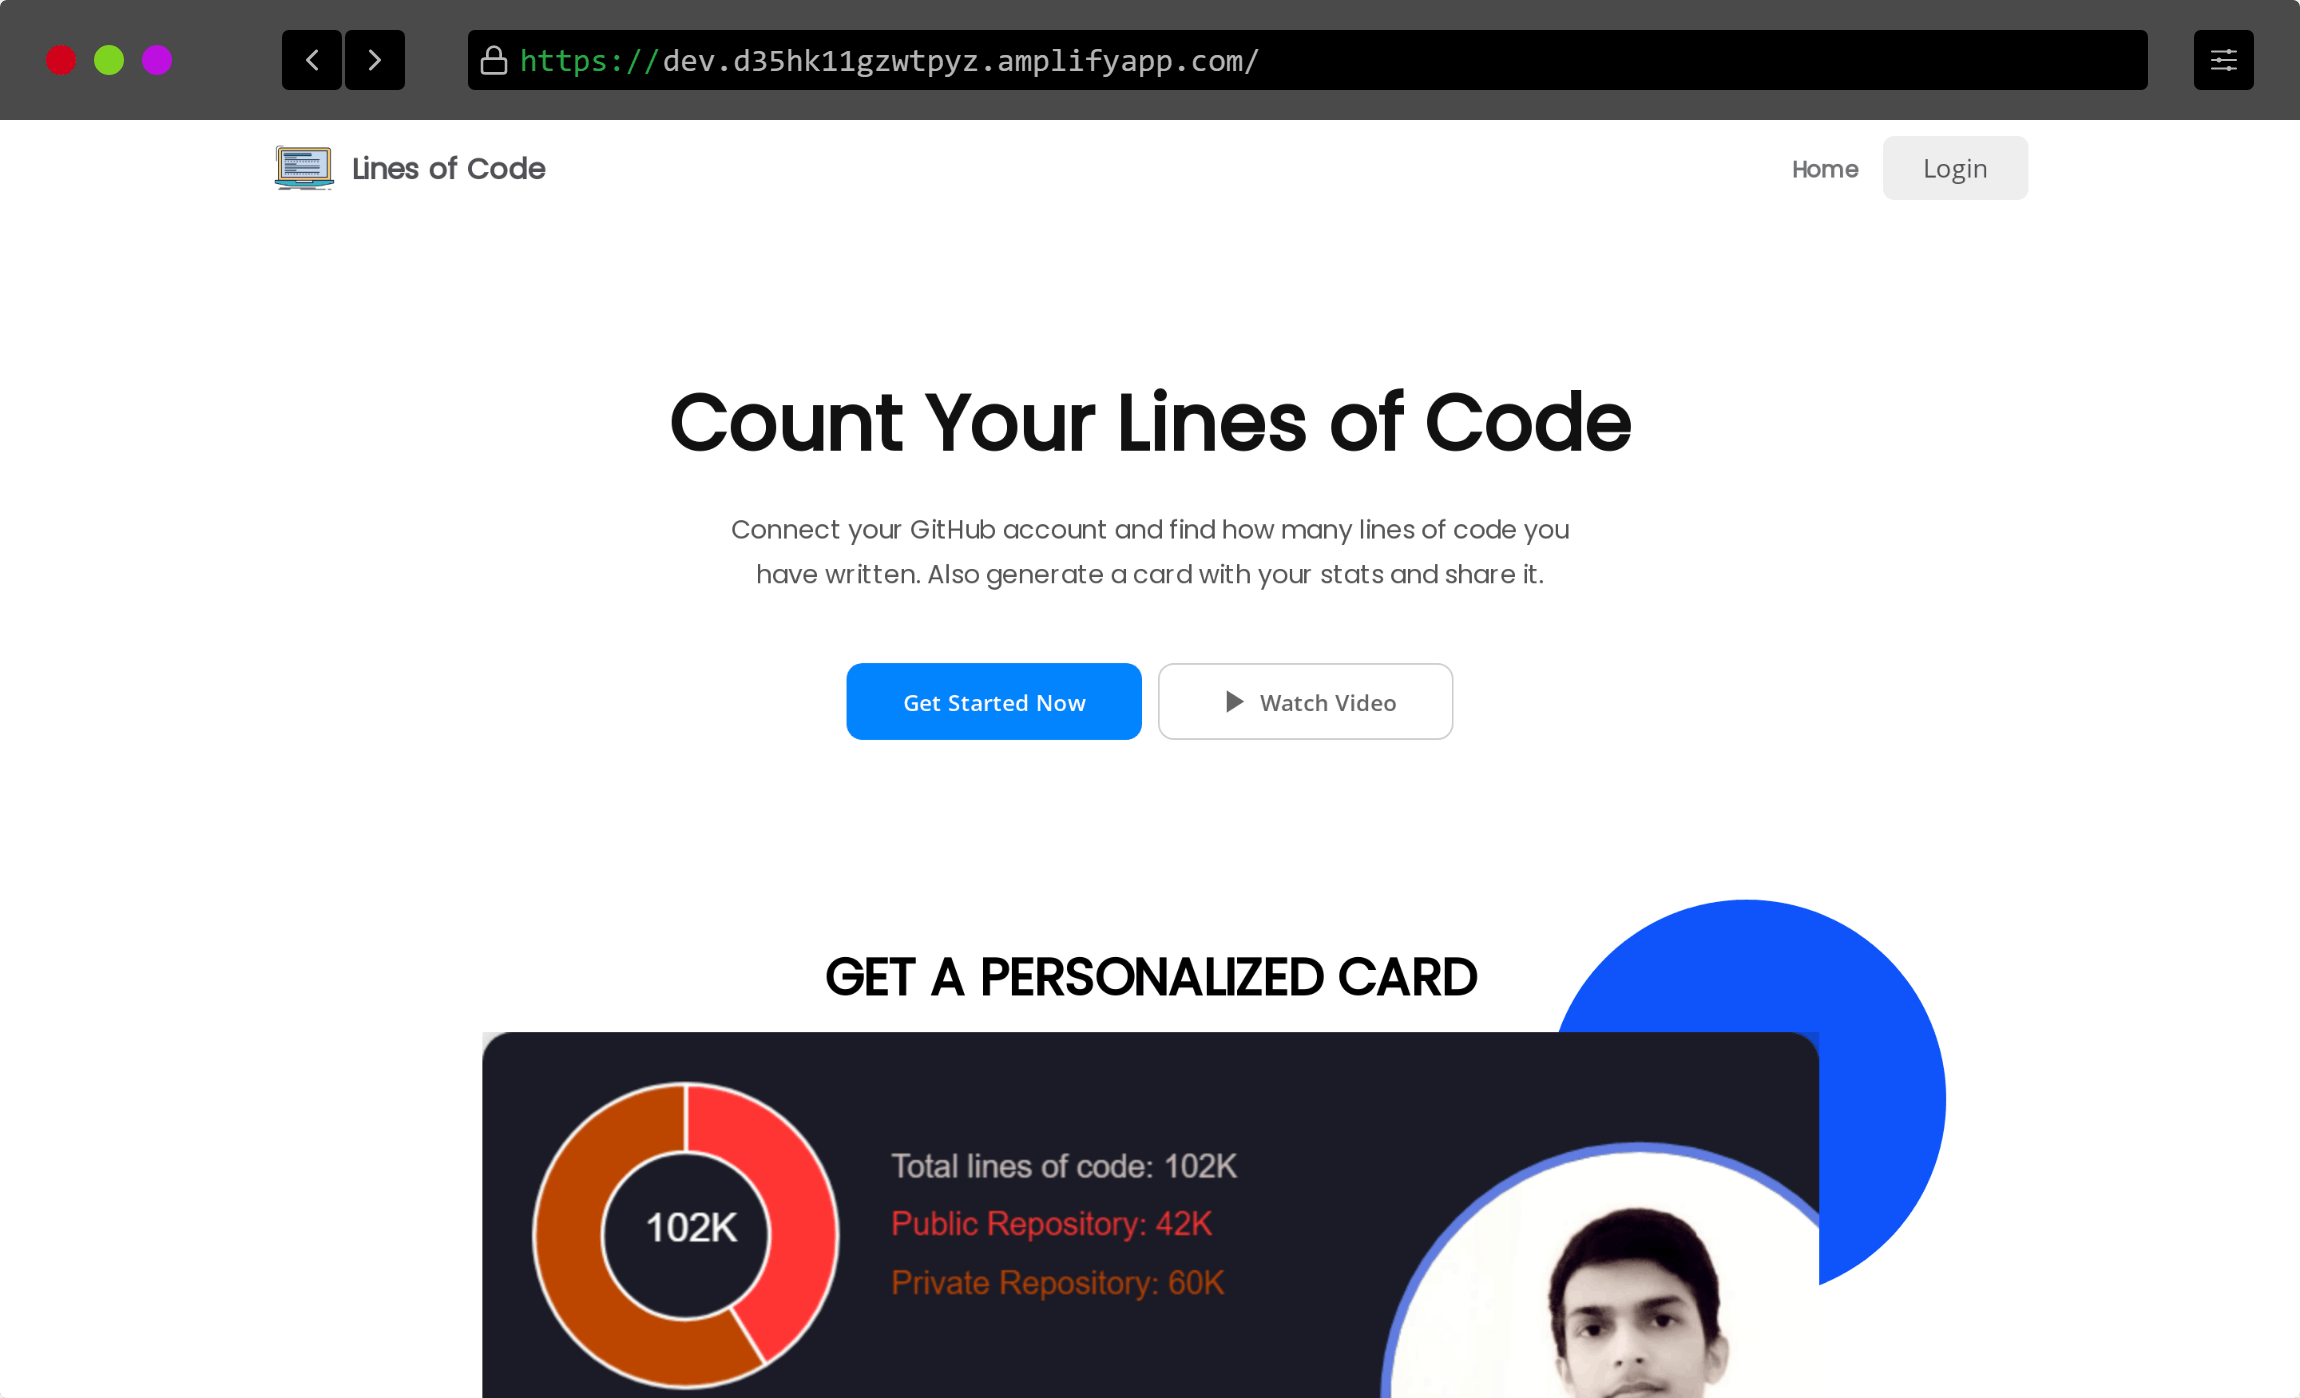 Home page of github lines of code